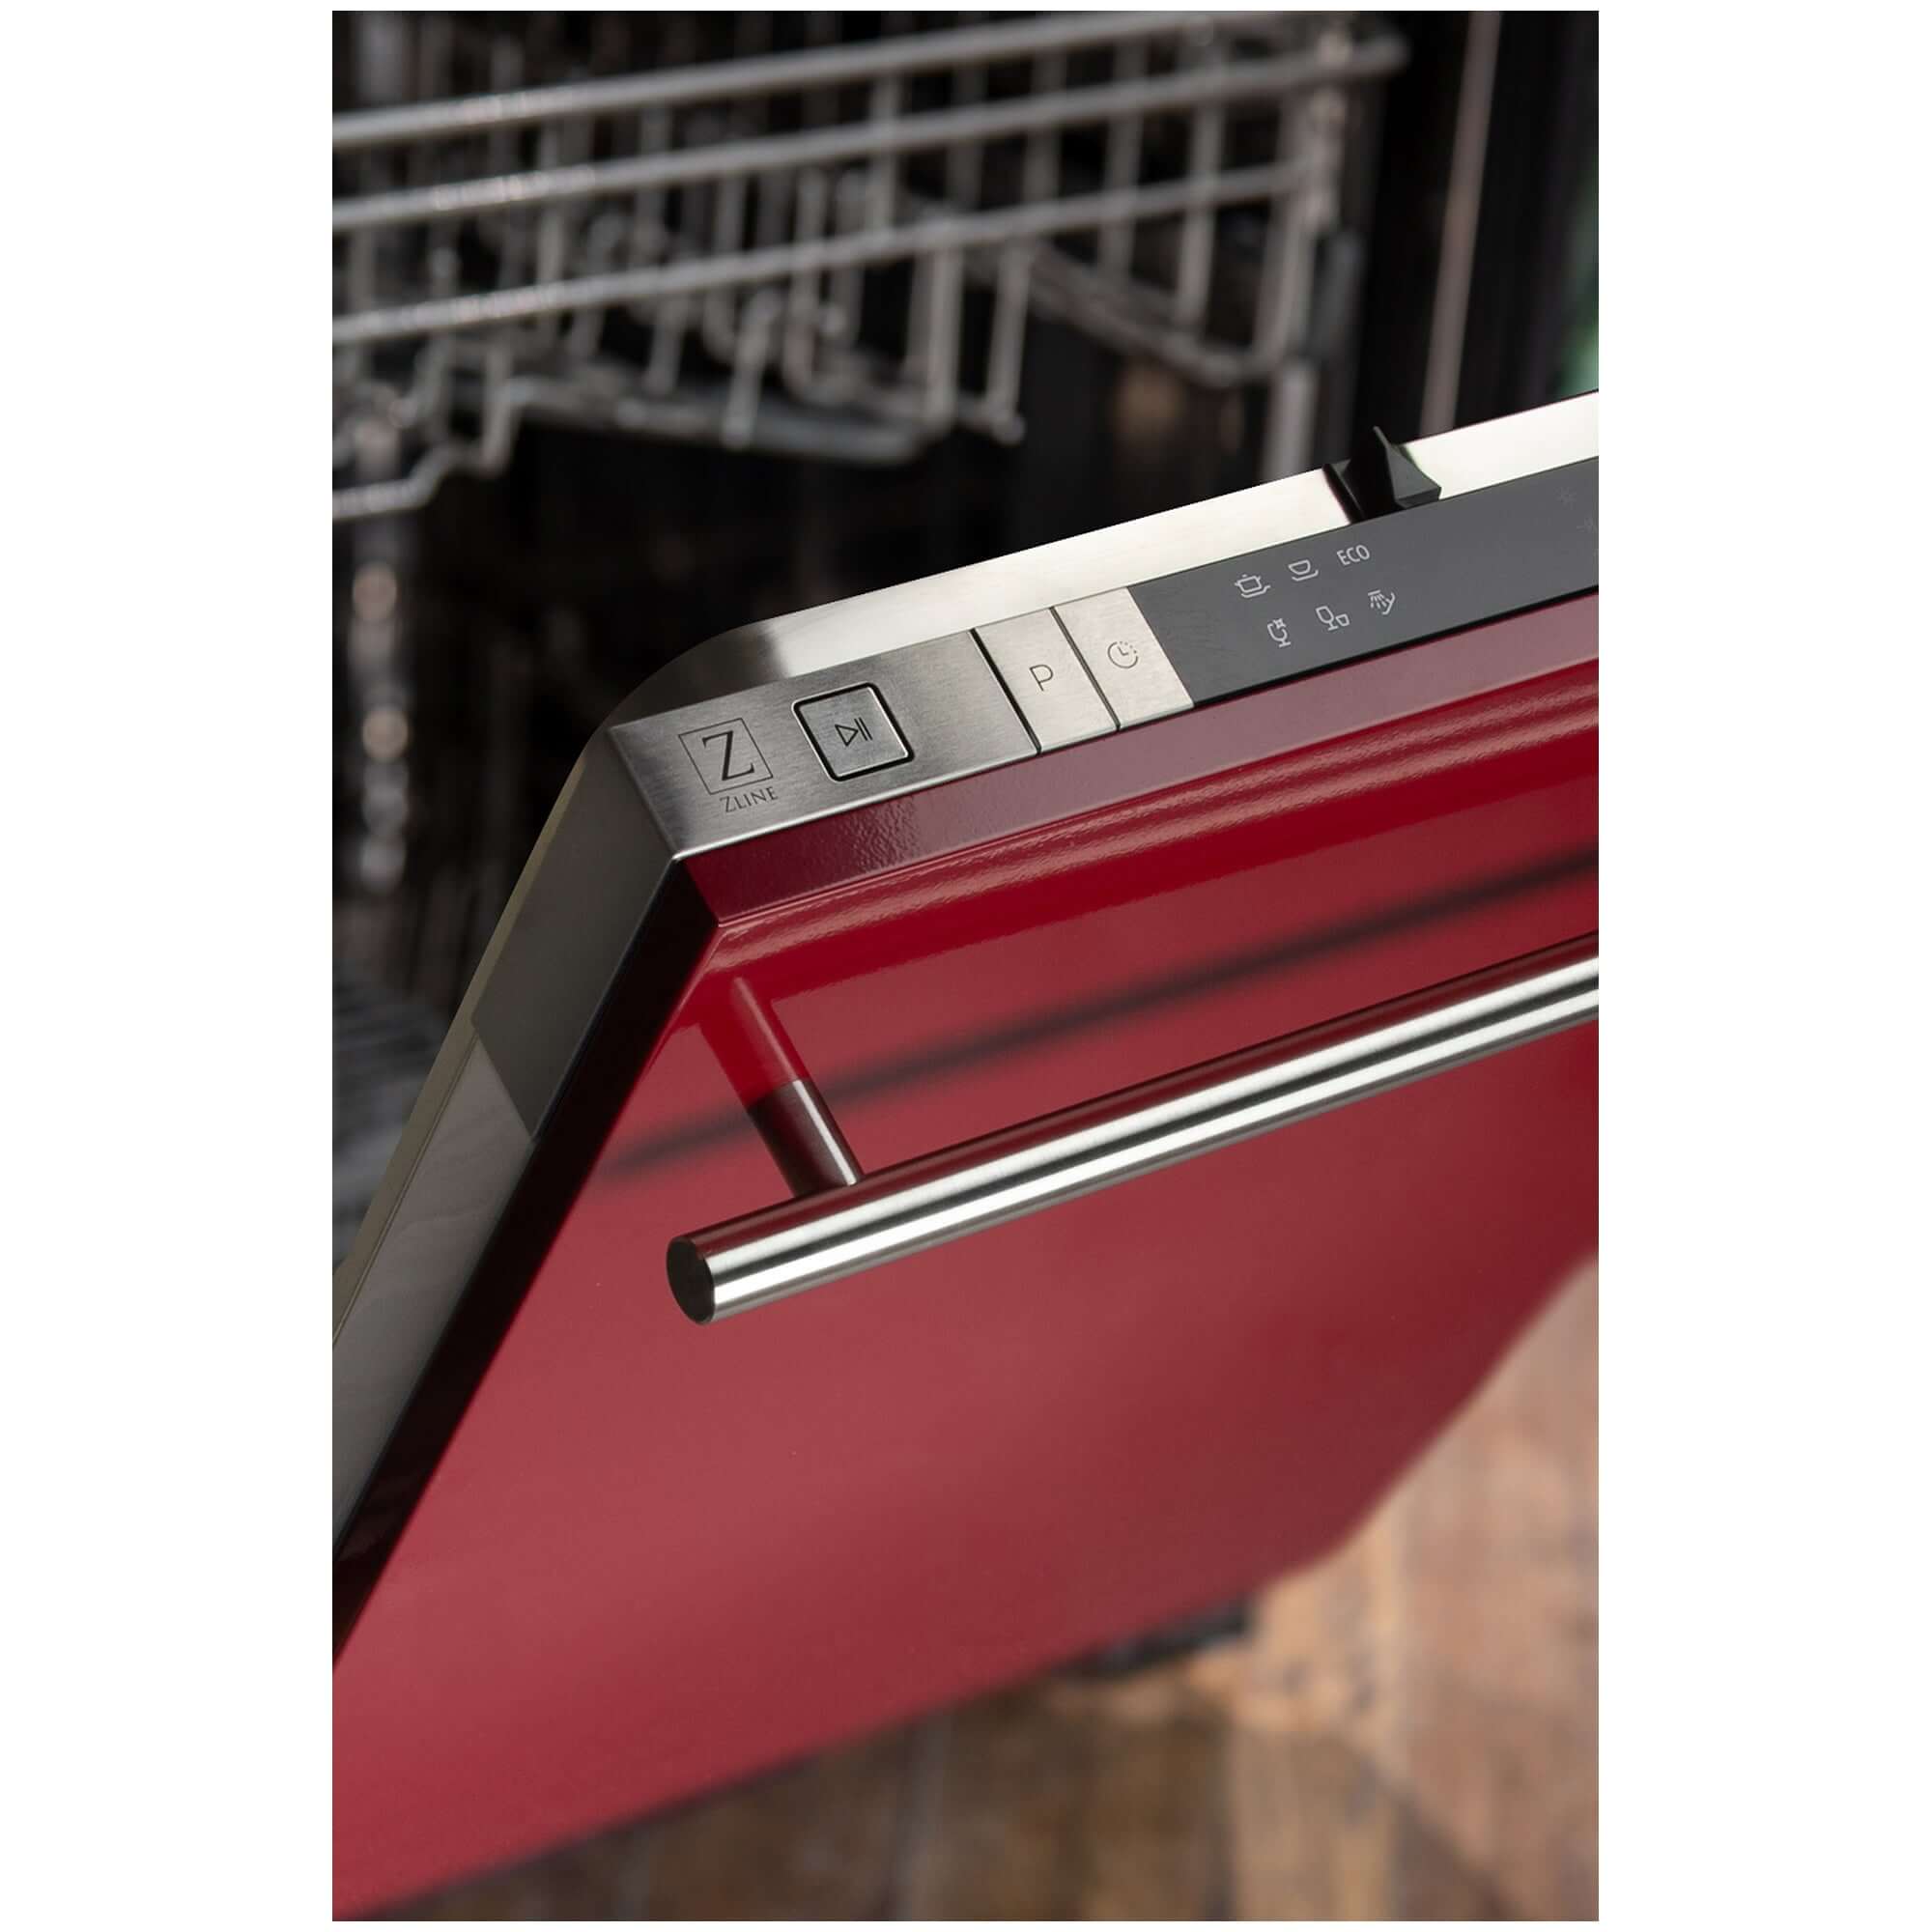 ZLINE 18 in. Compact Red Gloss Top Control Built-In Dishwasher with Stainless Steel Tub and Modern Style Handle, 52dBa (DW-RG-H-18)